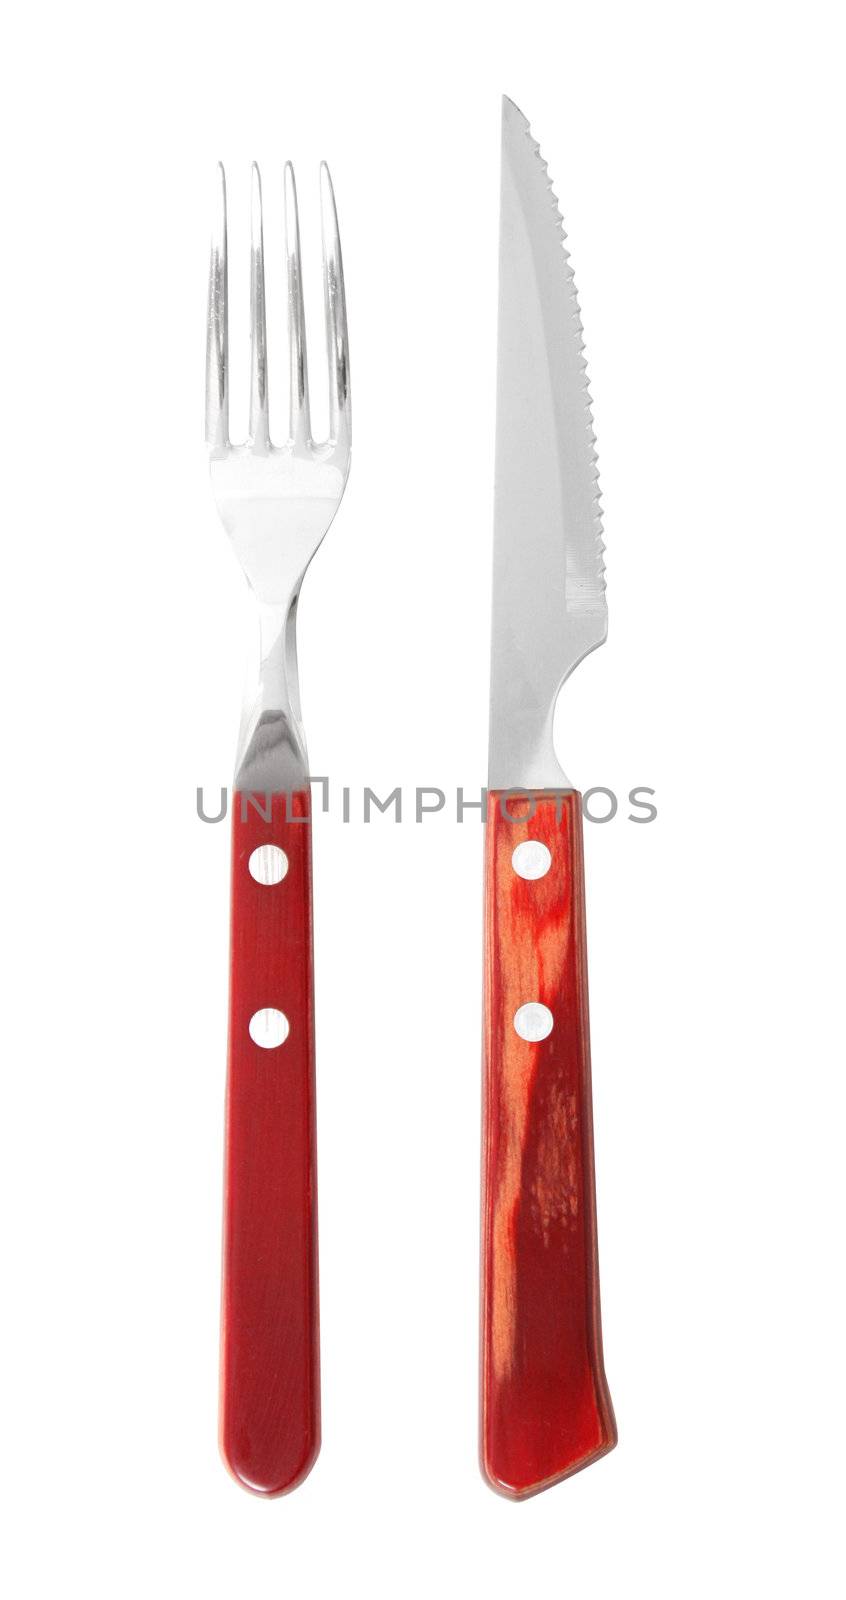 A wooden set of fork and knife